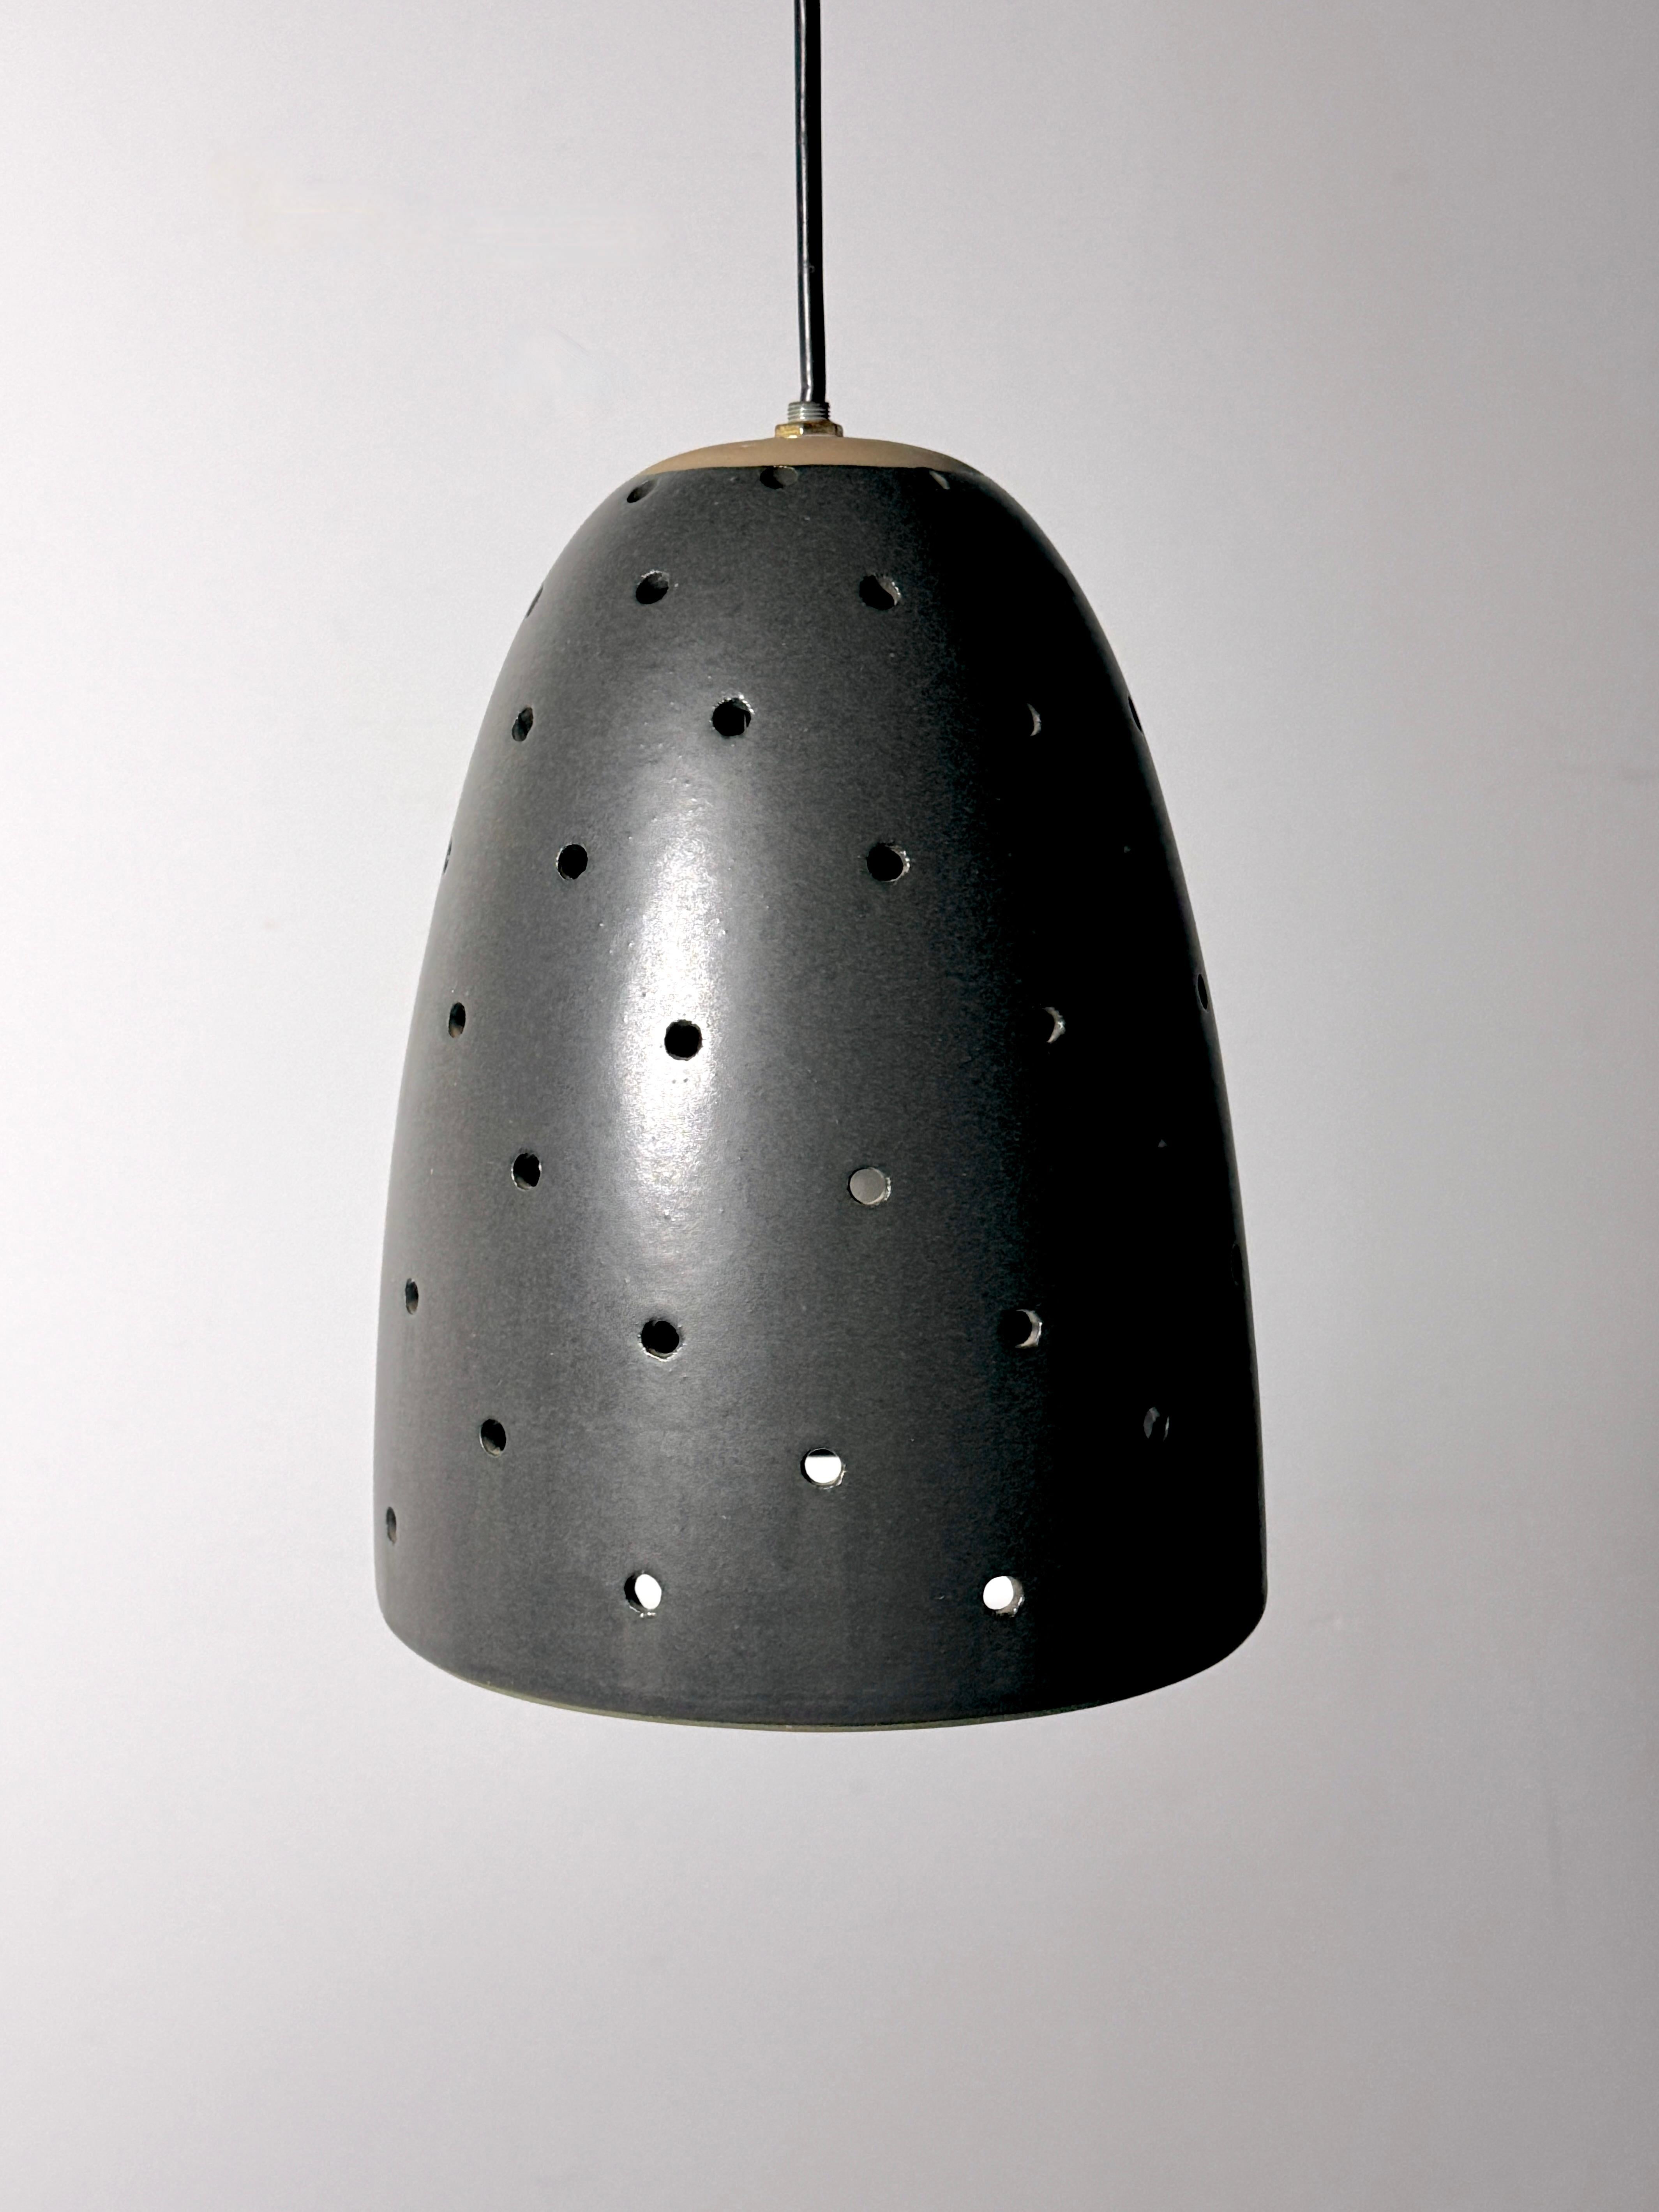 Rare hanging pendant lamp designed by Gordon and Jane Martz for Marshall Studios 1960s

Modern 236 in matte black glaze with perforated holes for a soft and enchanting light pattern

8.25 inch diameter
11 inch height 